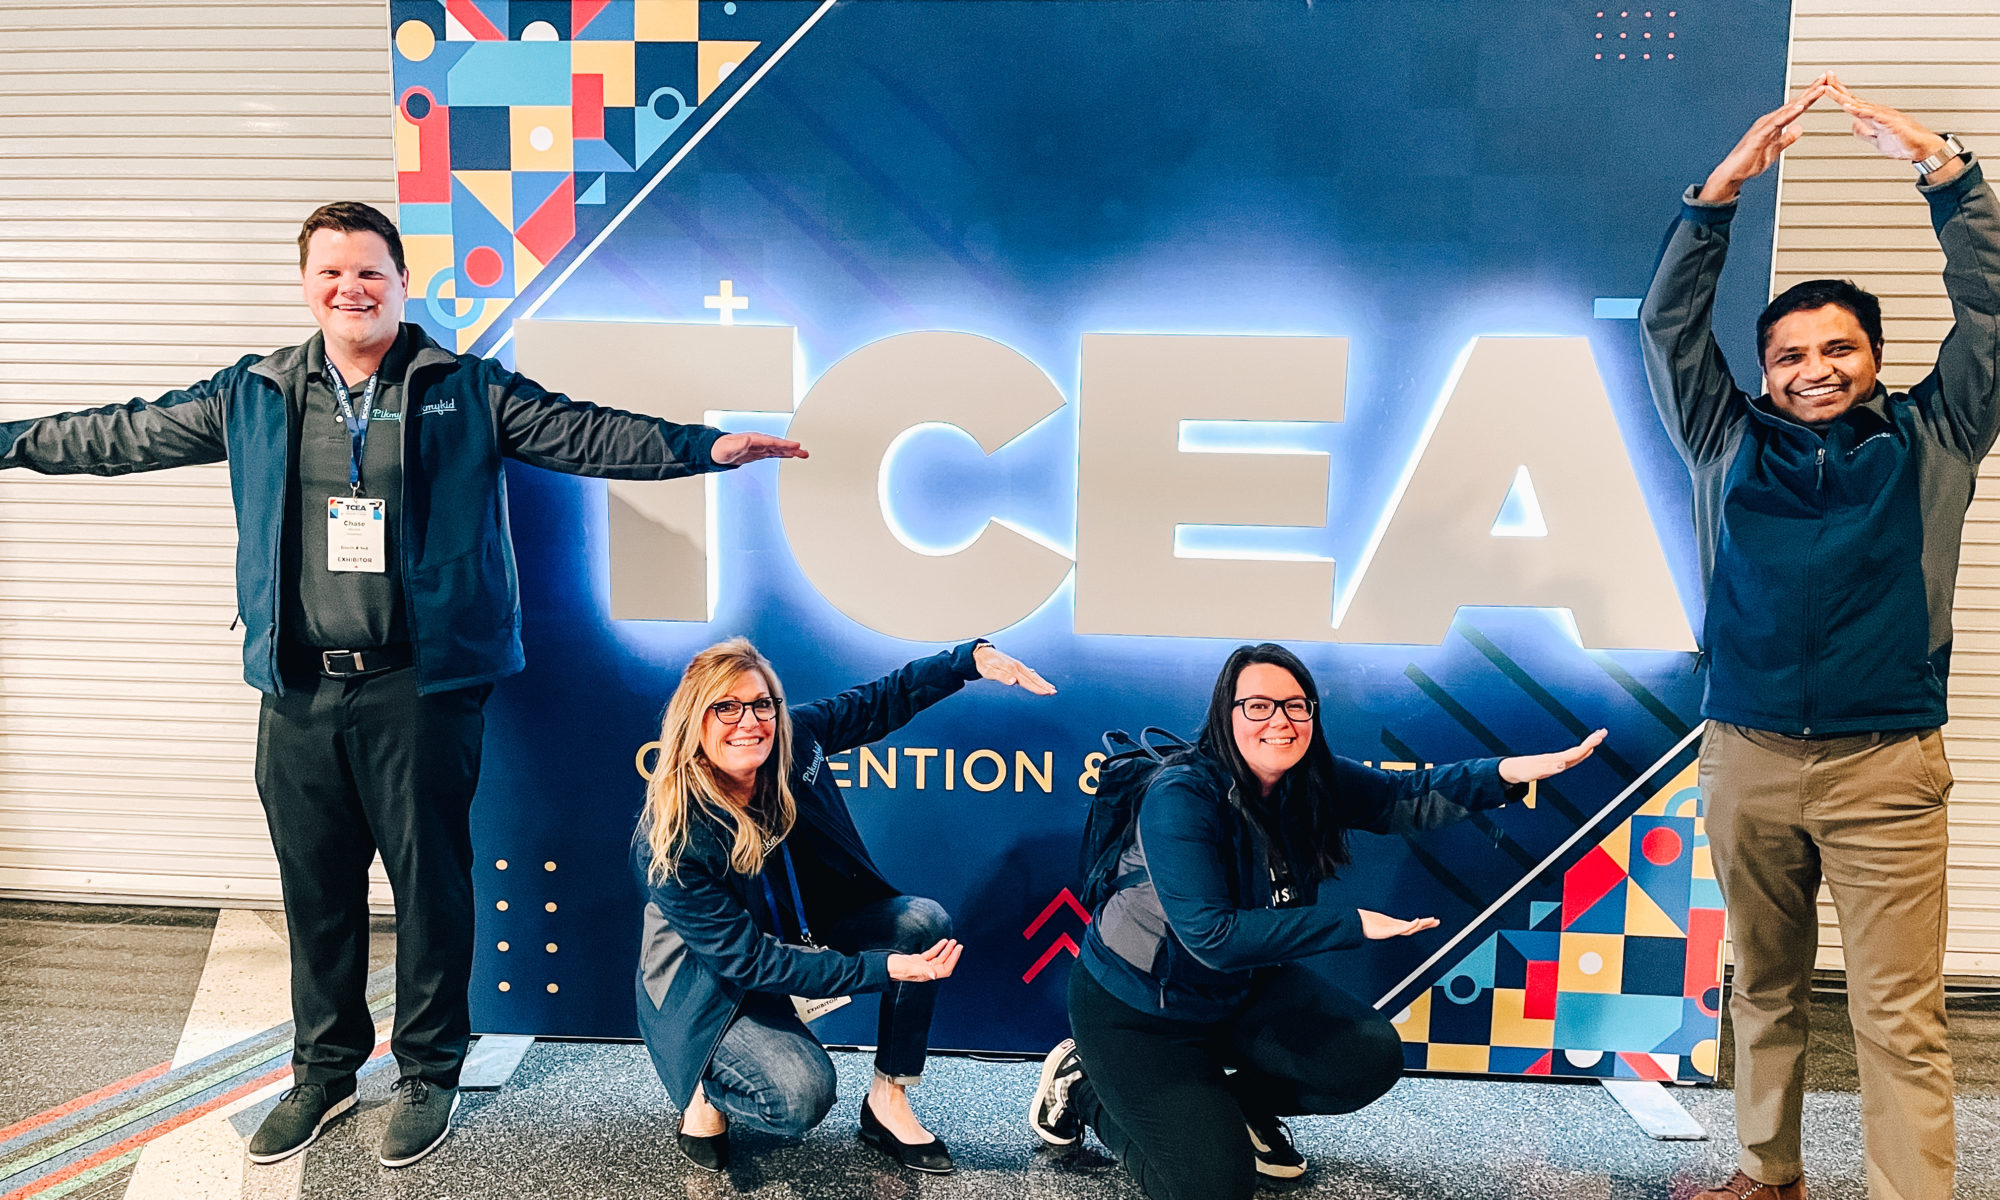 4 things we learned at TCEA